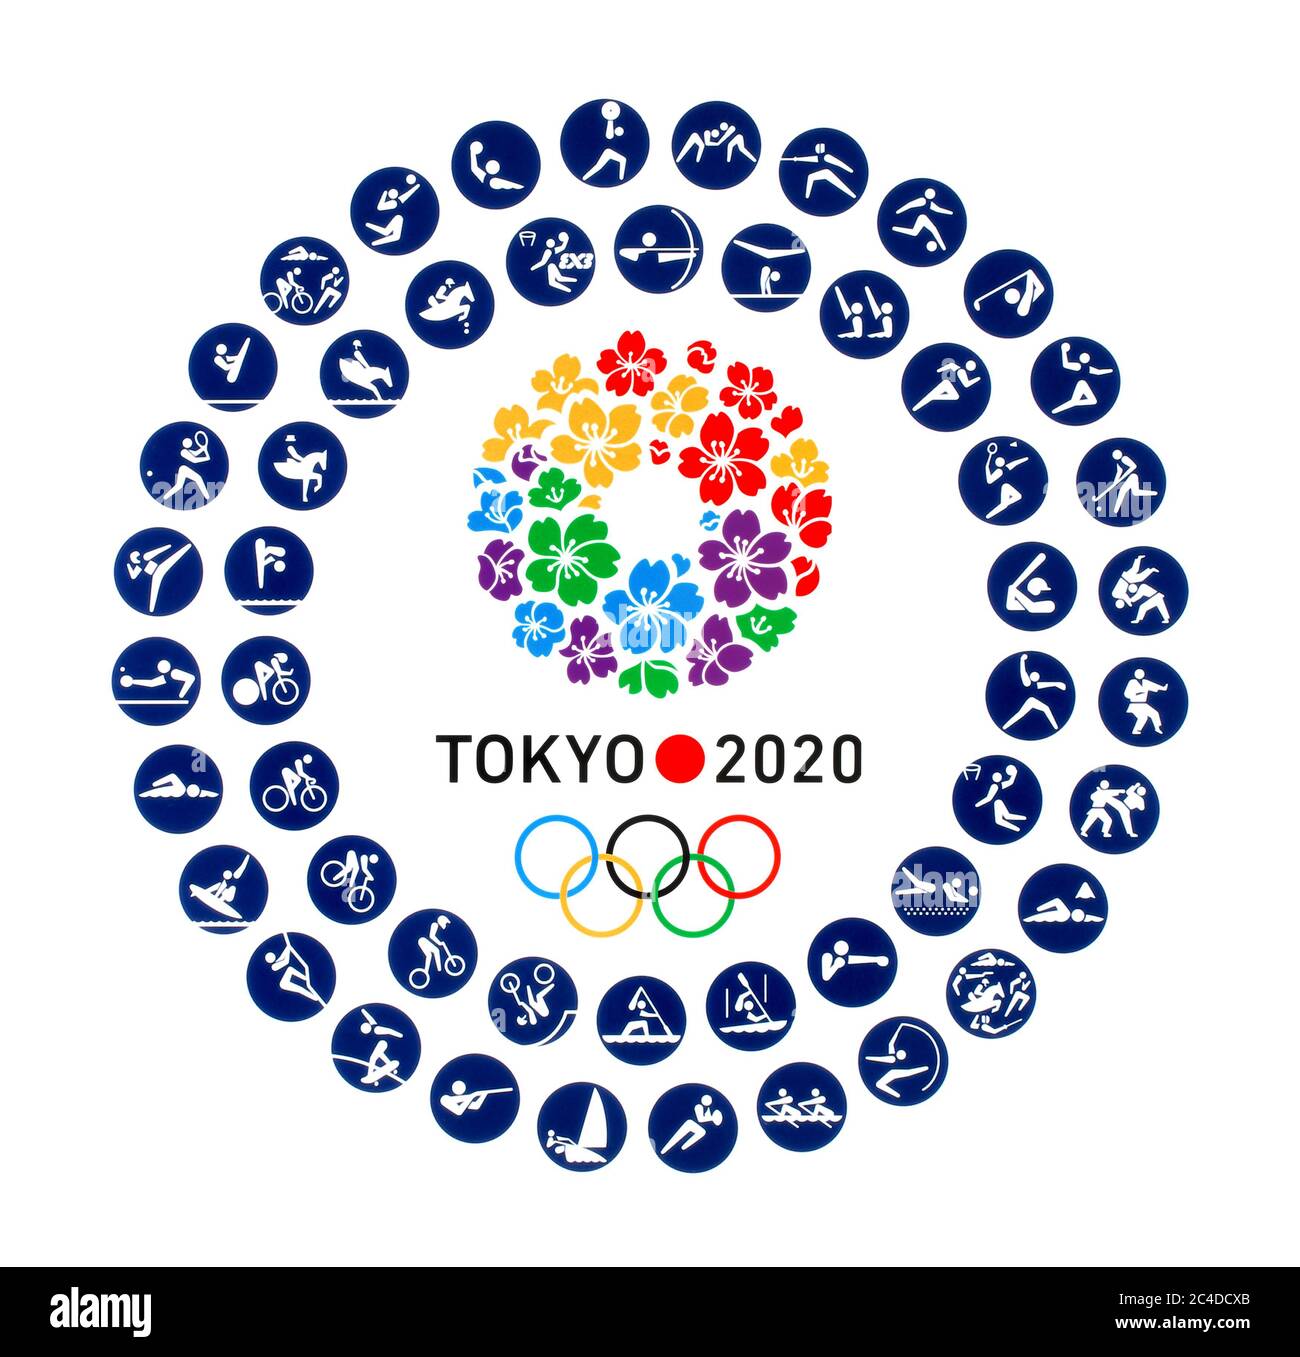 Kiev, Ukraine - October 04, 2019: Tokyo Candidate City logo for the 2020 Summer Olympic Games with official icons of kinds of sport in Tokyo, Japan, f Stock Photo